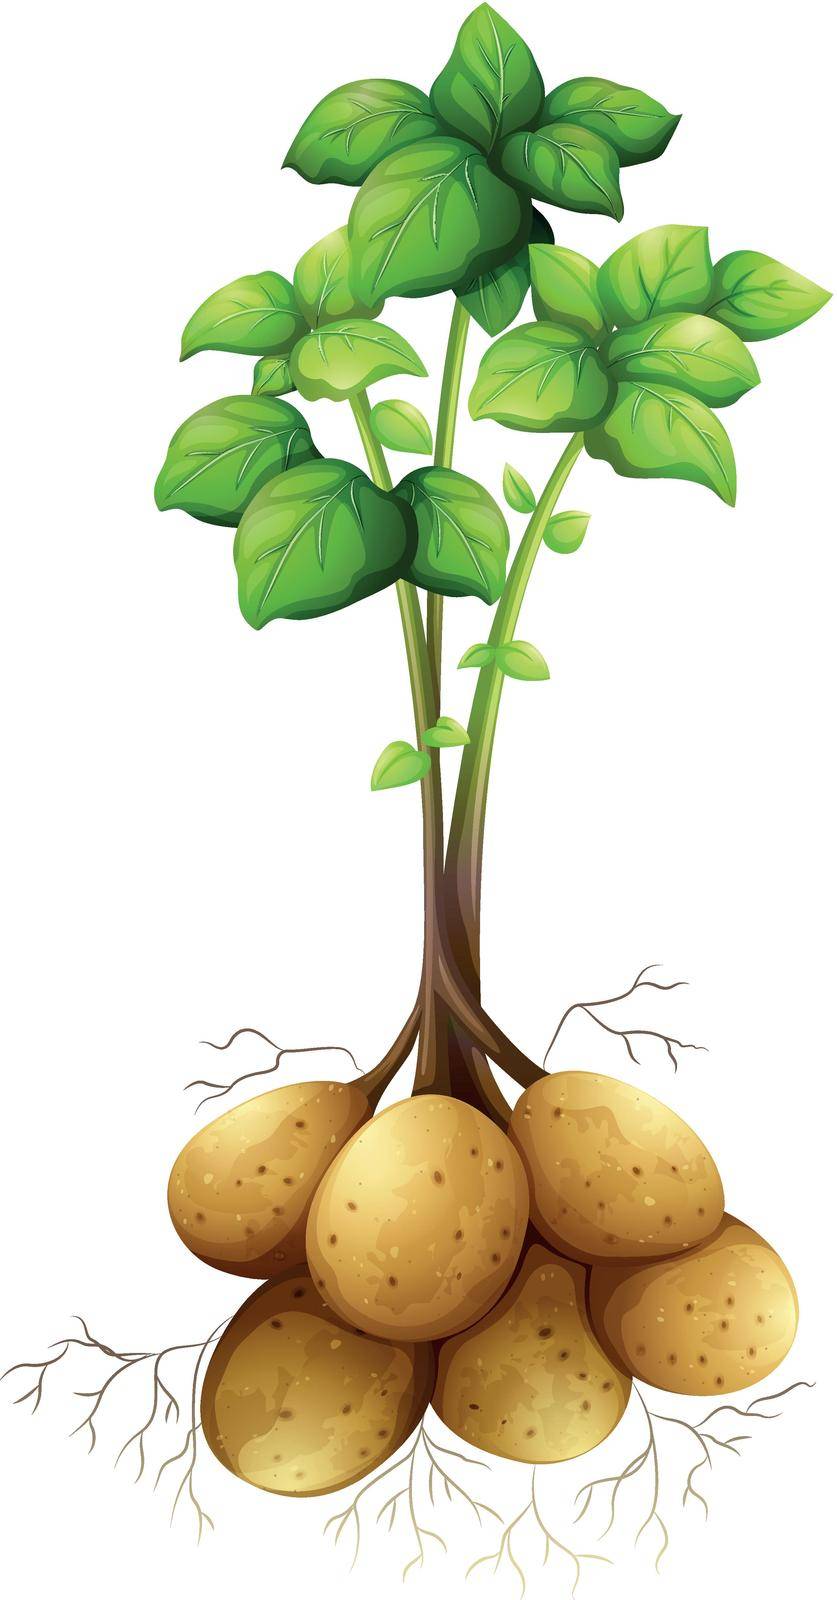 Potatoes with the stem and leaves illustration